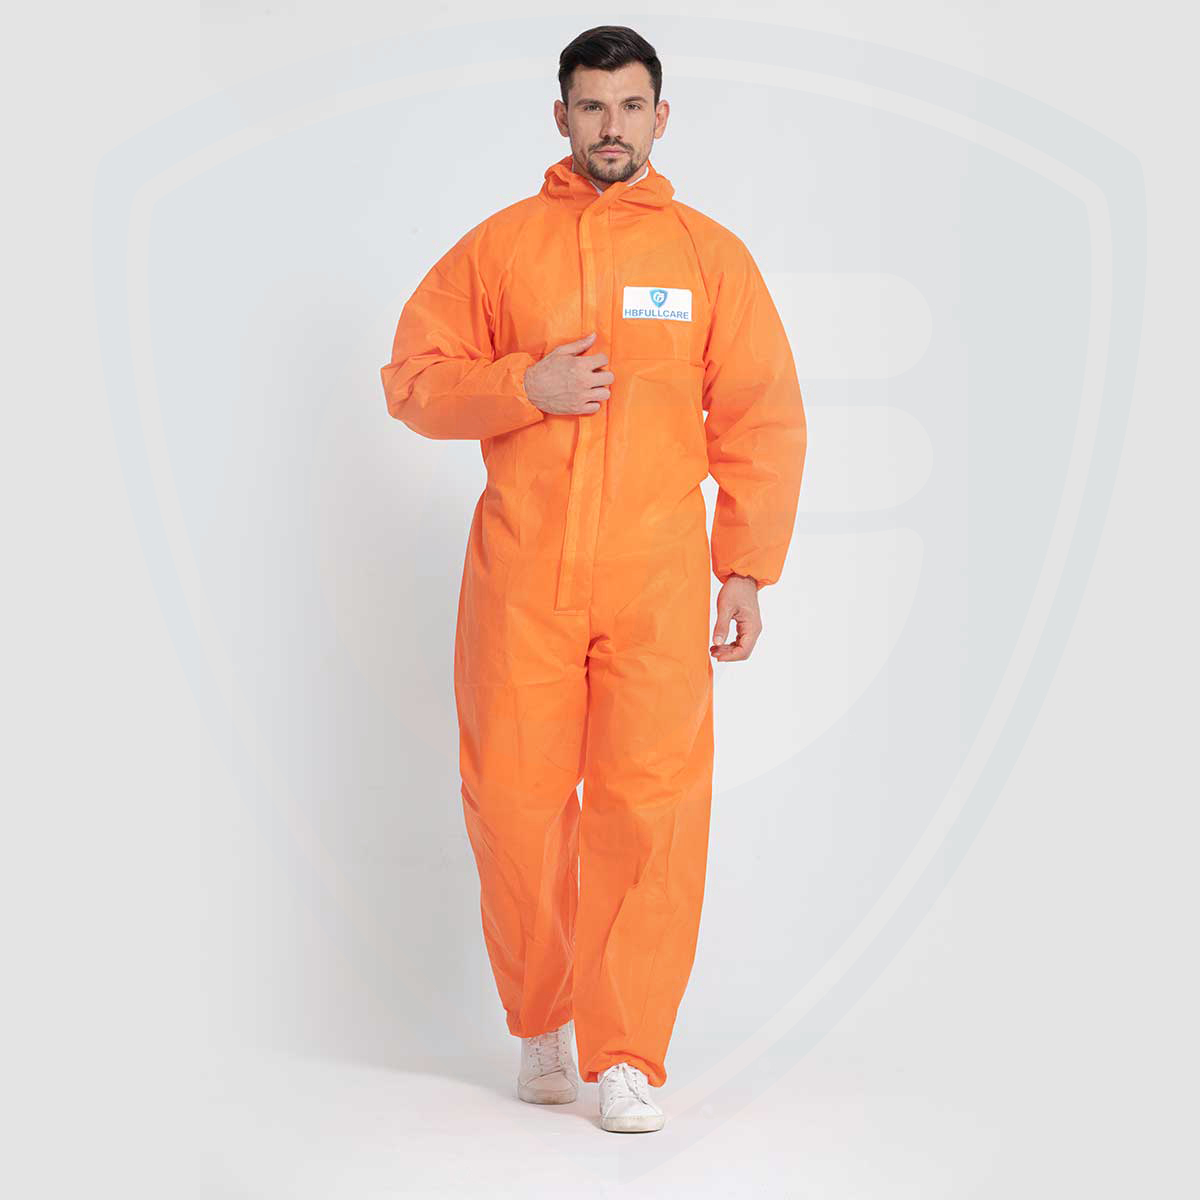 SMS Overall Polypropylene Nonwoven Anti-static Disposable Protective Coverall Workwear